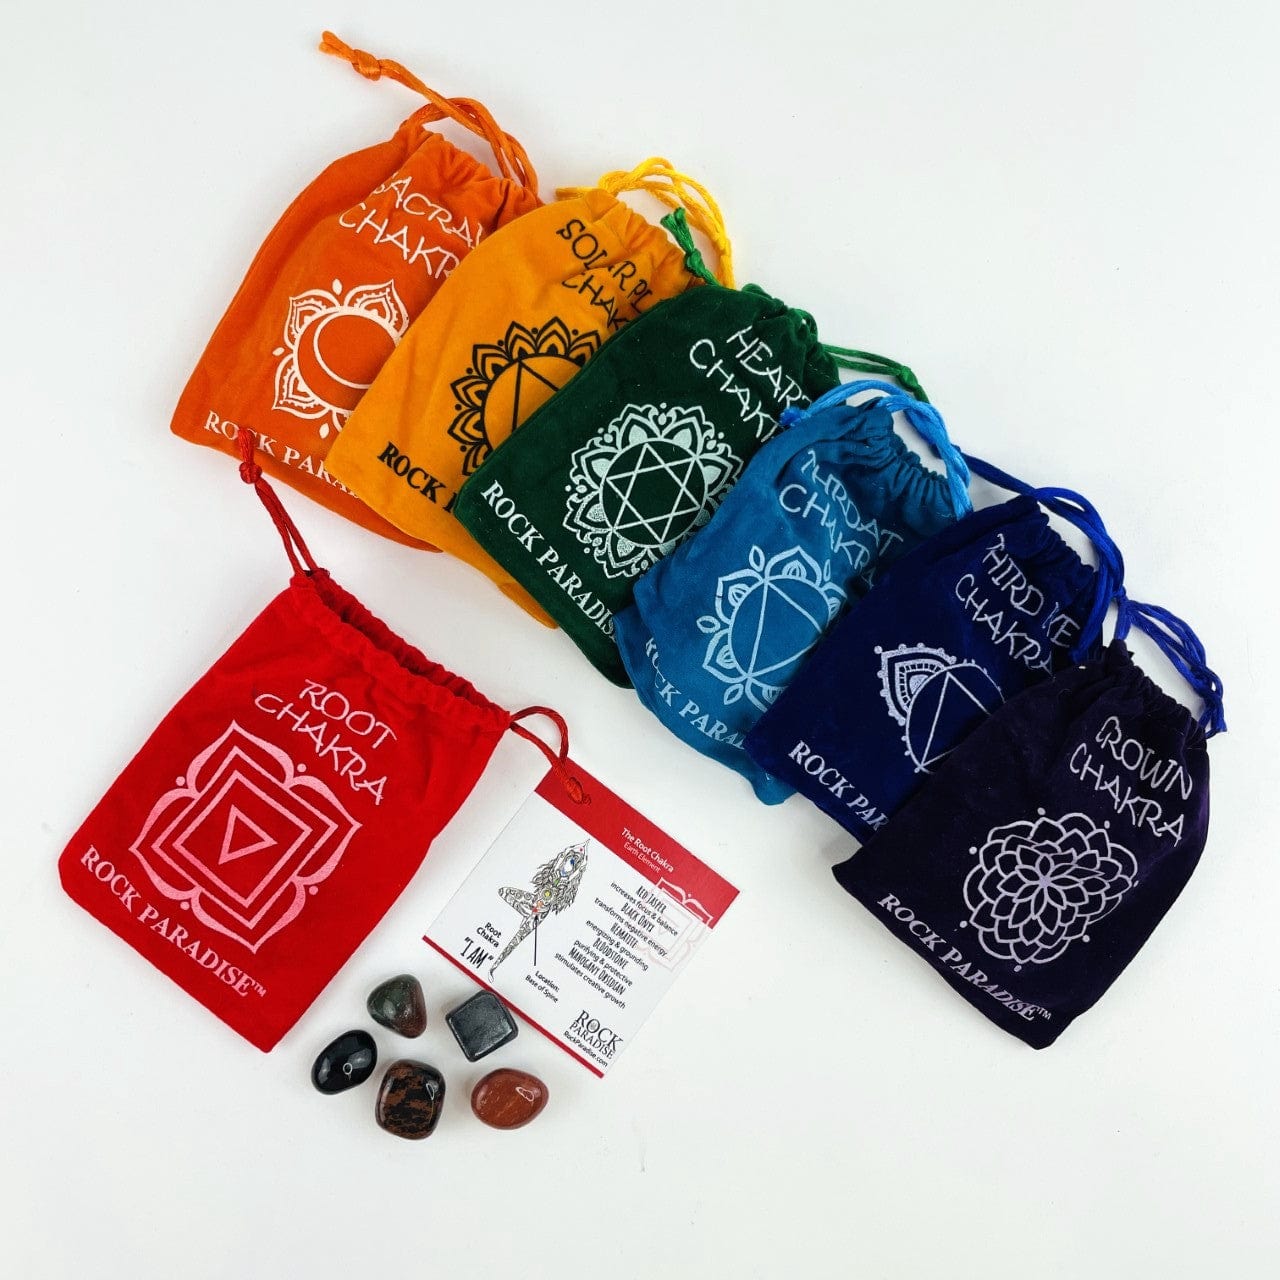 The Root Chakra Pouch with the card and stones next to it, and all the other sets behind